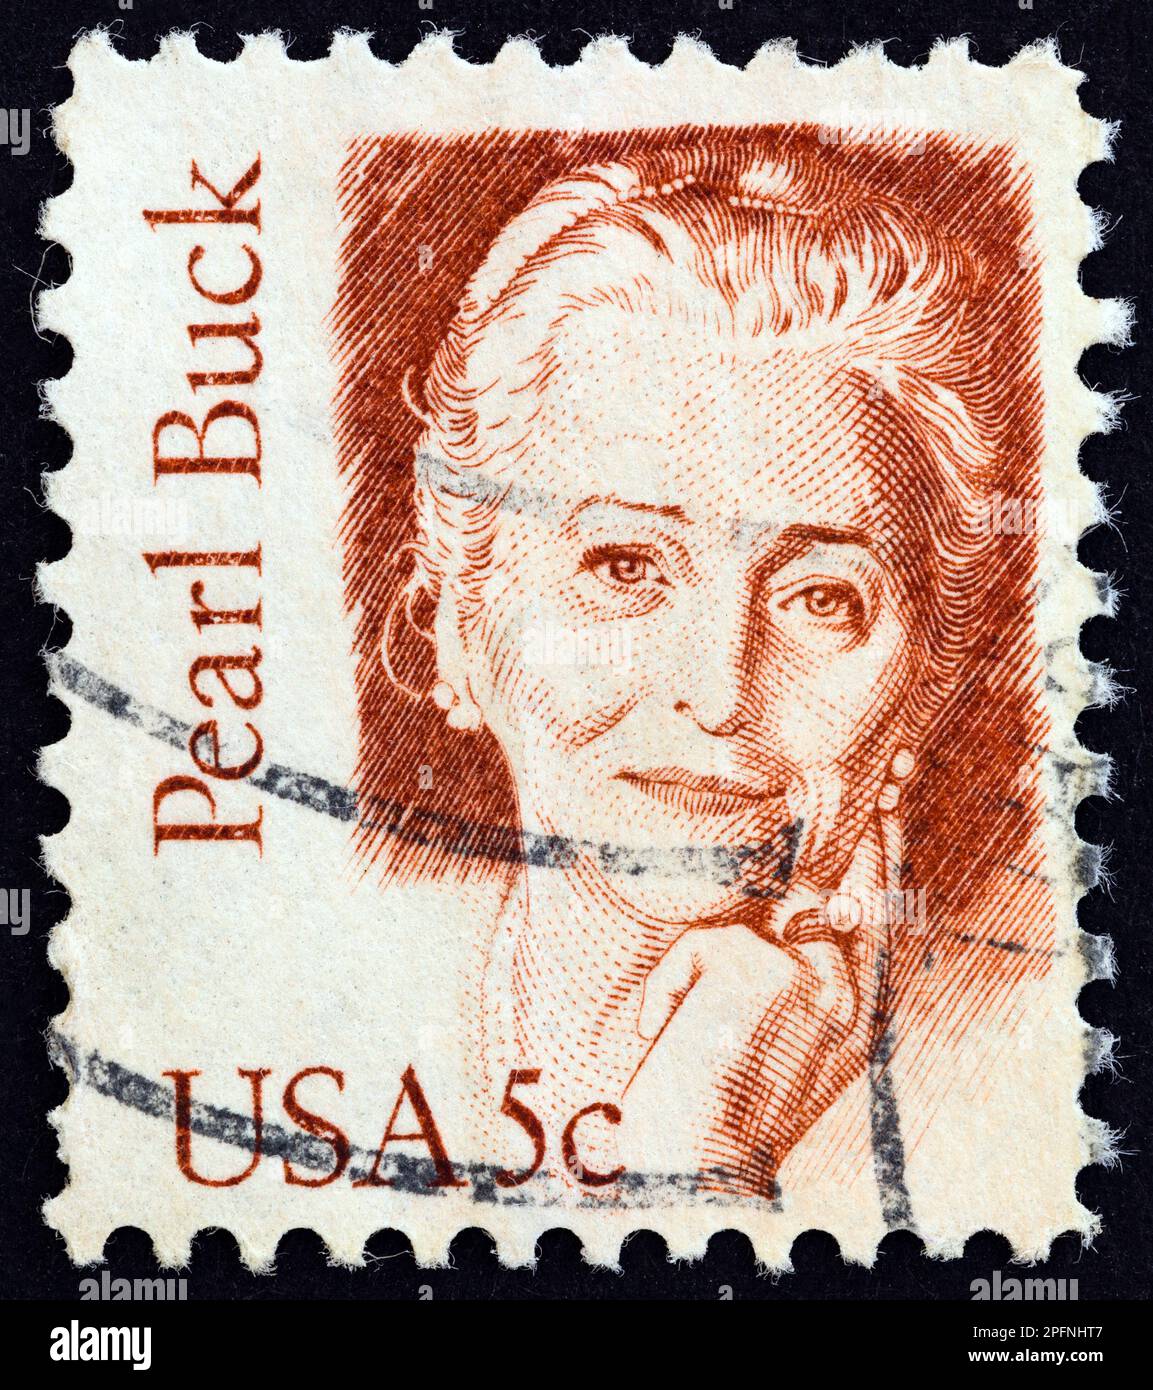 USA - CIRCA 1980: A stamp printed in USA from the "Great Americans" issue shows writer and novelist Pearl Buck, circa 1980. Stock Photo